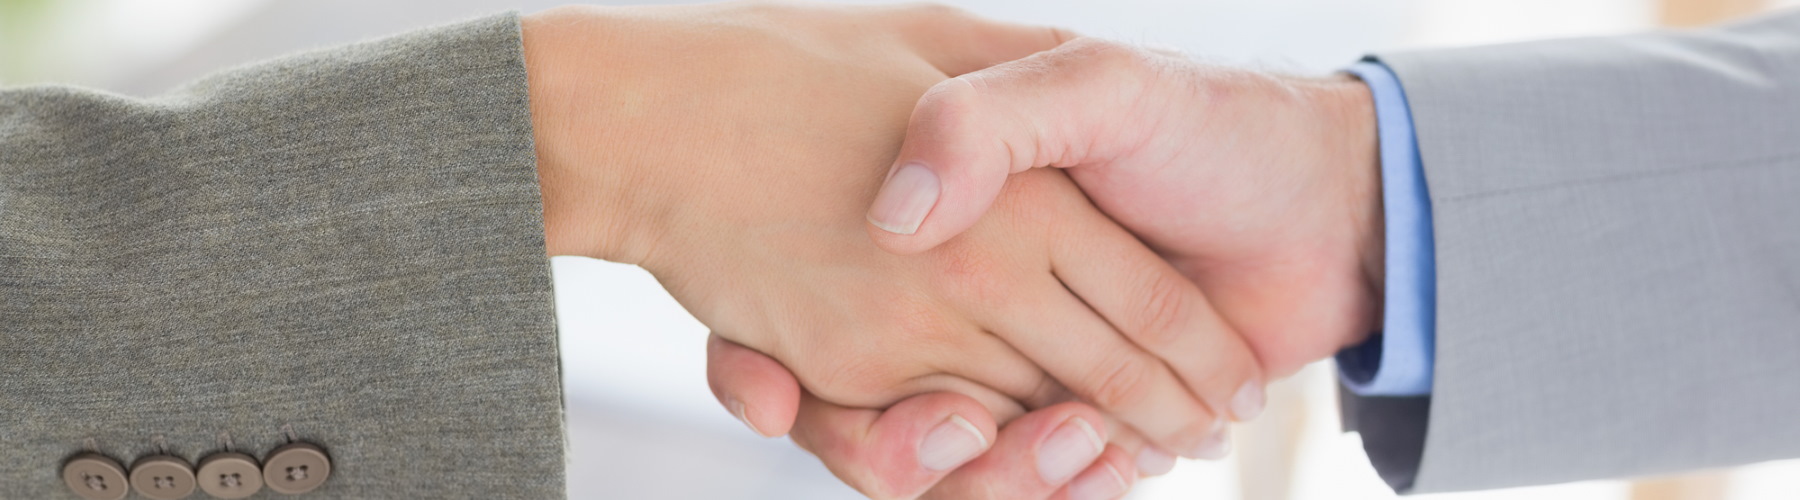 two people shaking hands close up